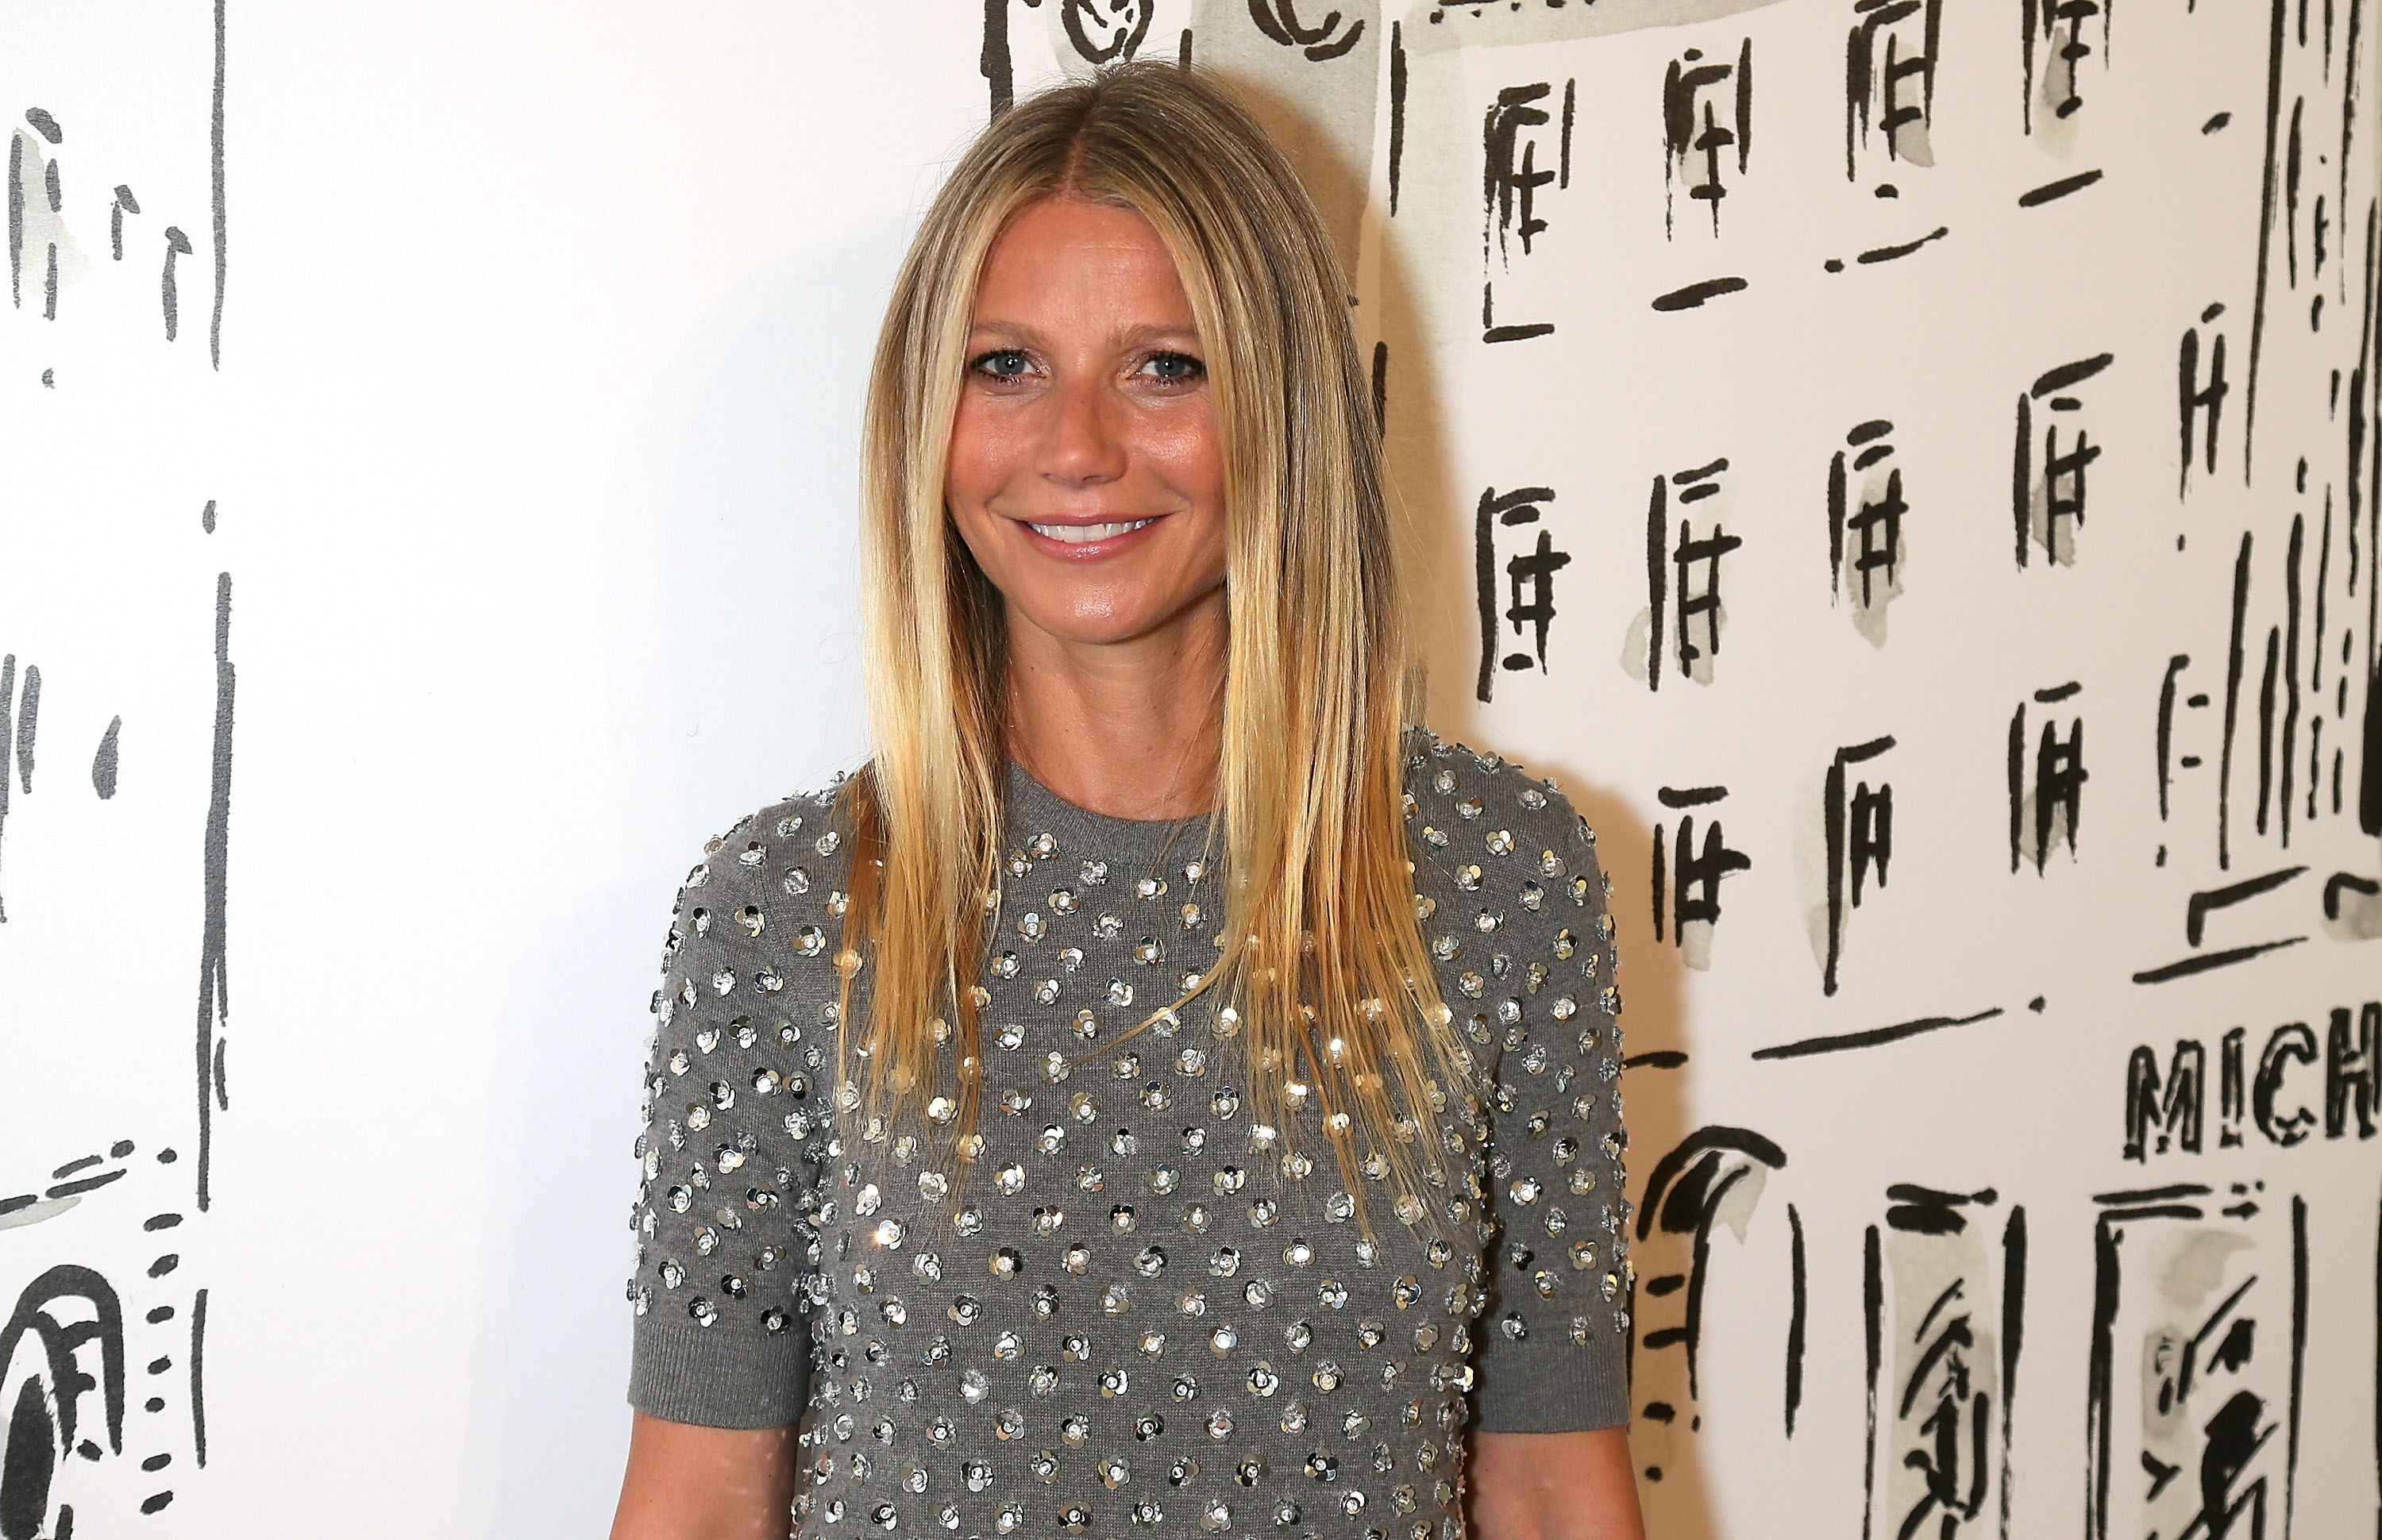 Gwyneth Paltrow attends a cocktail party hosted by Michael Kors in celebration of their new Regent Street Flagship Store opening, at the Michael Kors Flagship Store, on June 22, 2016 in London, England. (David M. Benett&mdash;Dave Benett/Getty Images for Michael Kors)